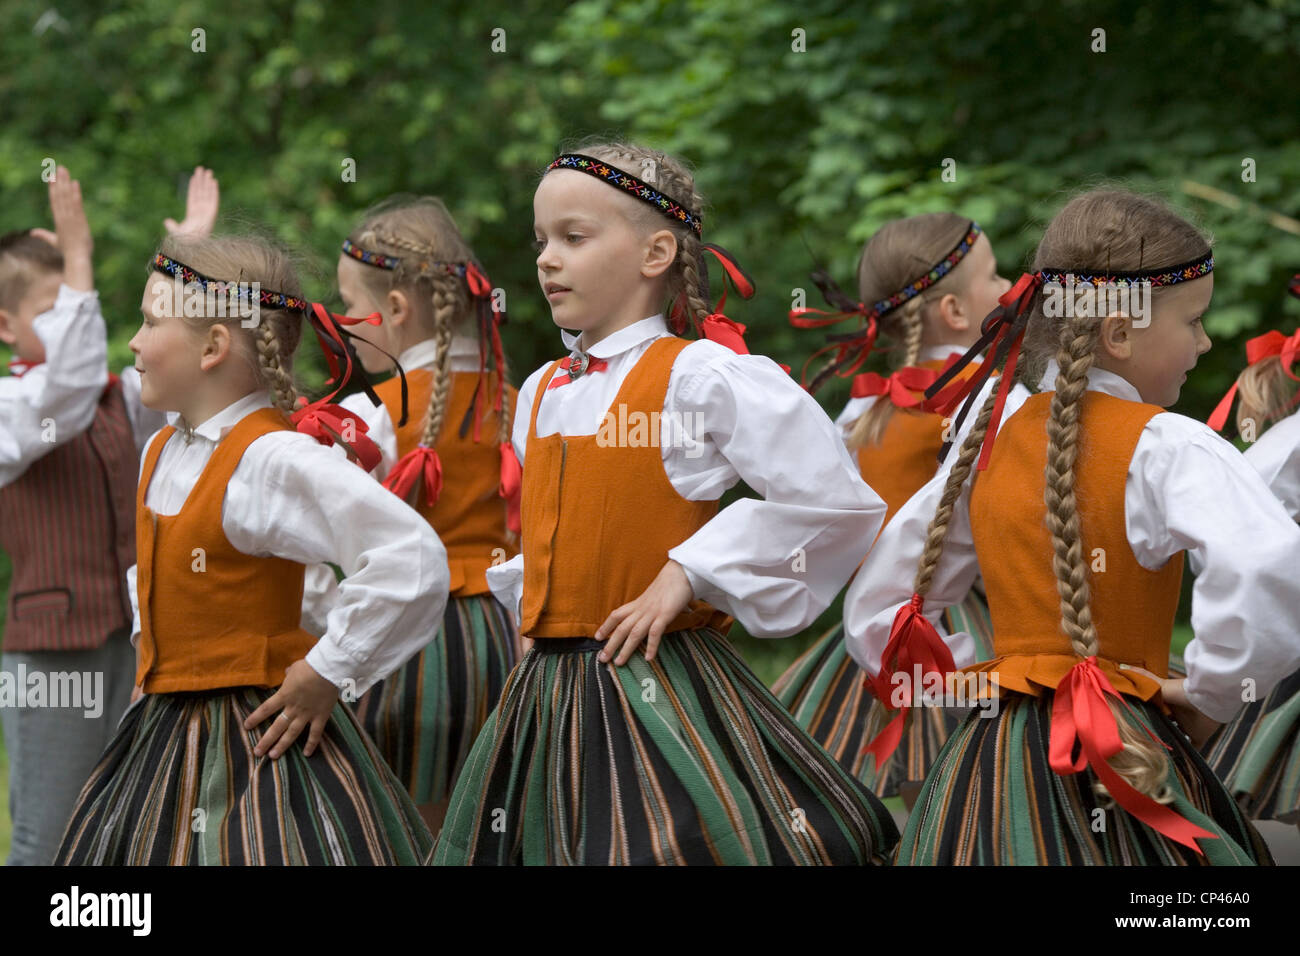 Latvia - Folk festival. Girls in traditional costume as they perform a folk dance Stock Photo